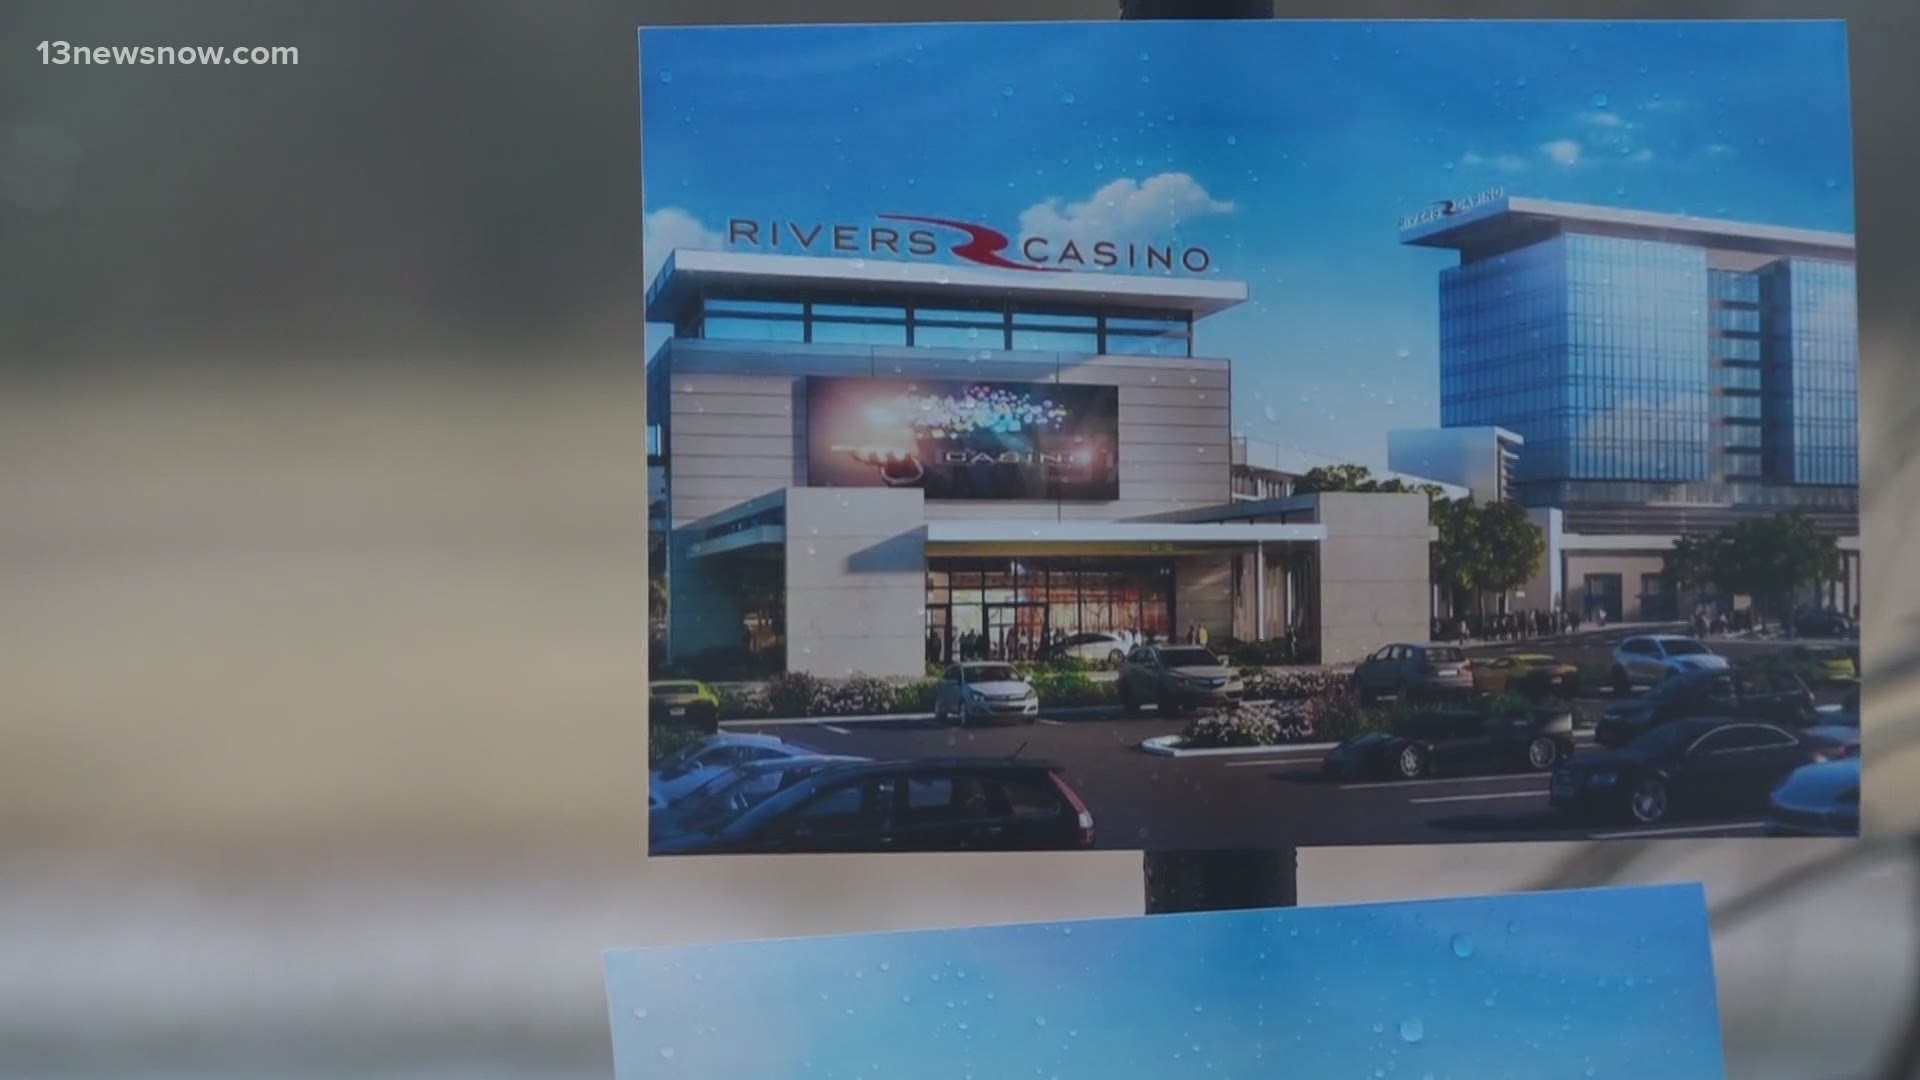 Small businesses have a chance to get in on a big venture: the Rivers Casino Project in Portsmouth.